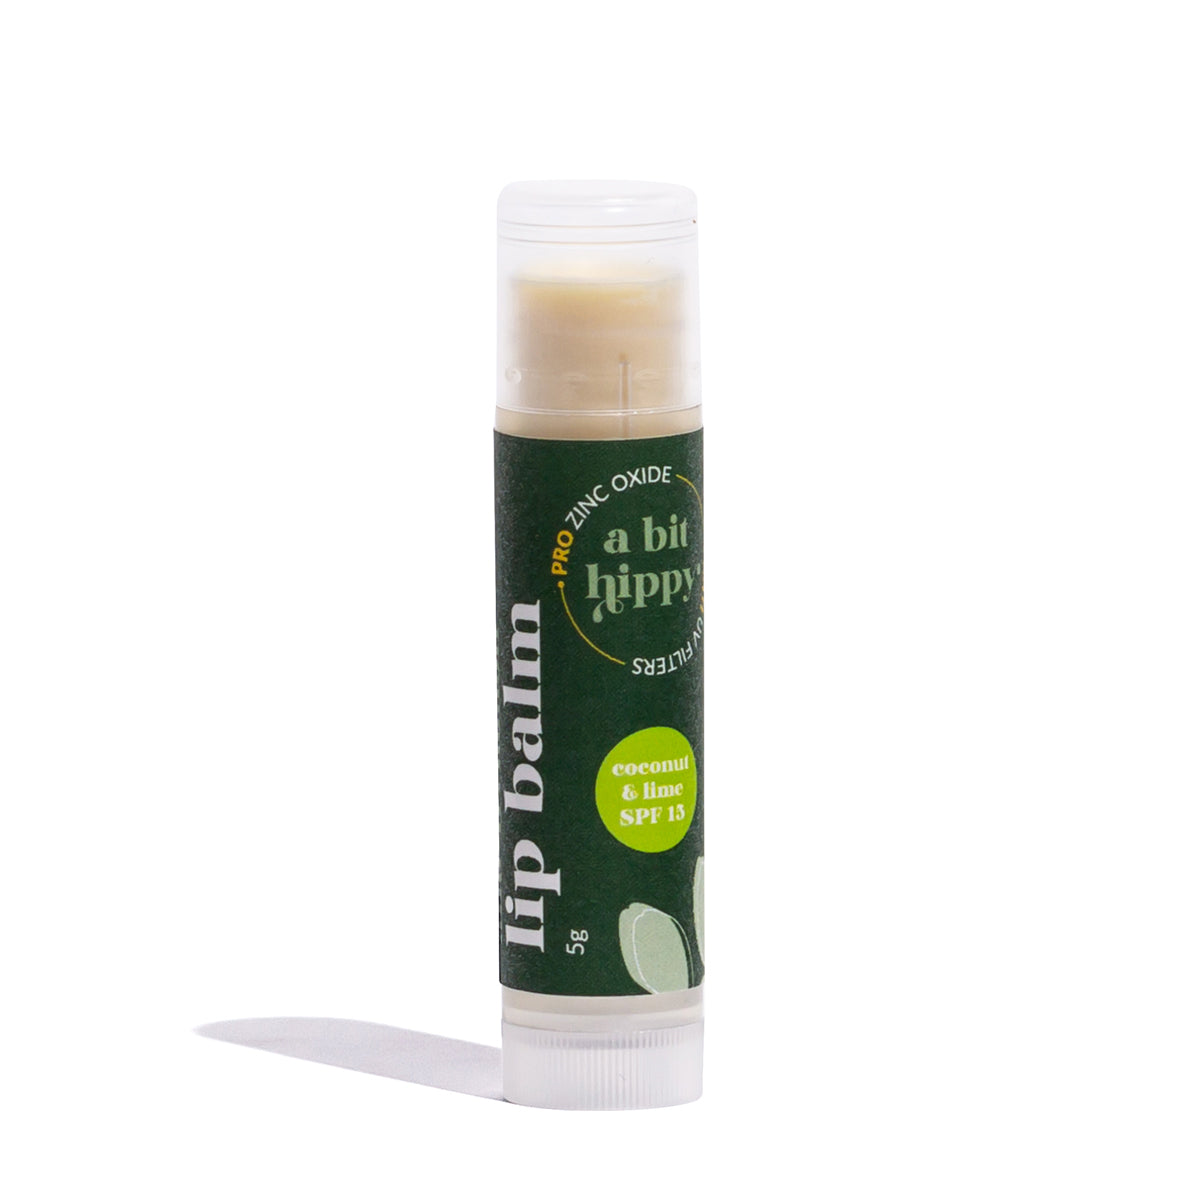 5g A bit Hippy coconut and lime SPF15 wind up lip balm